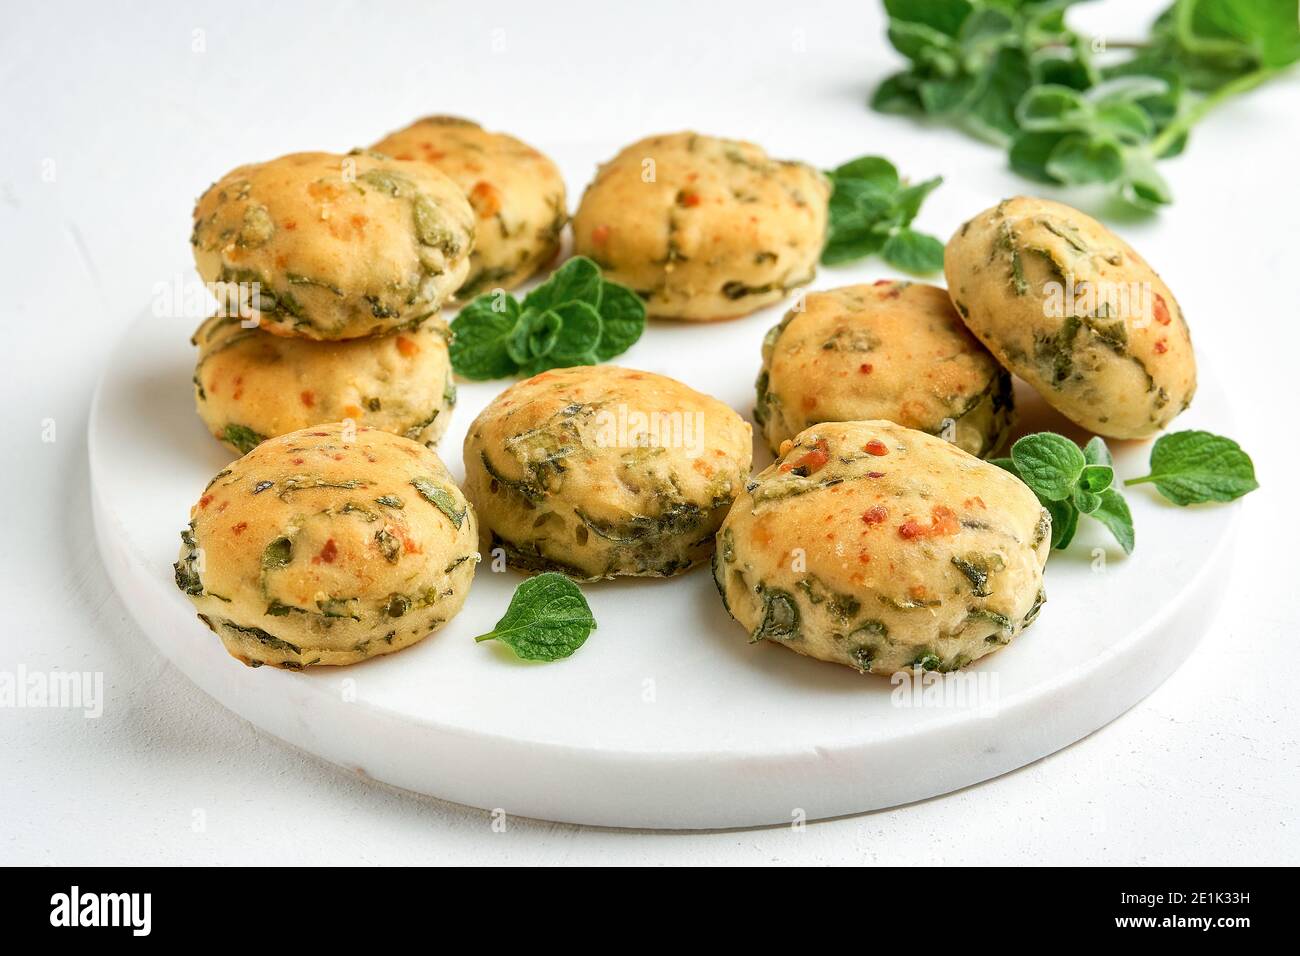 Homemade buns with fresh herbs and cheese Stock Photo